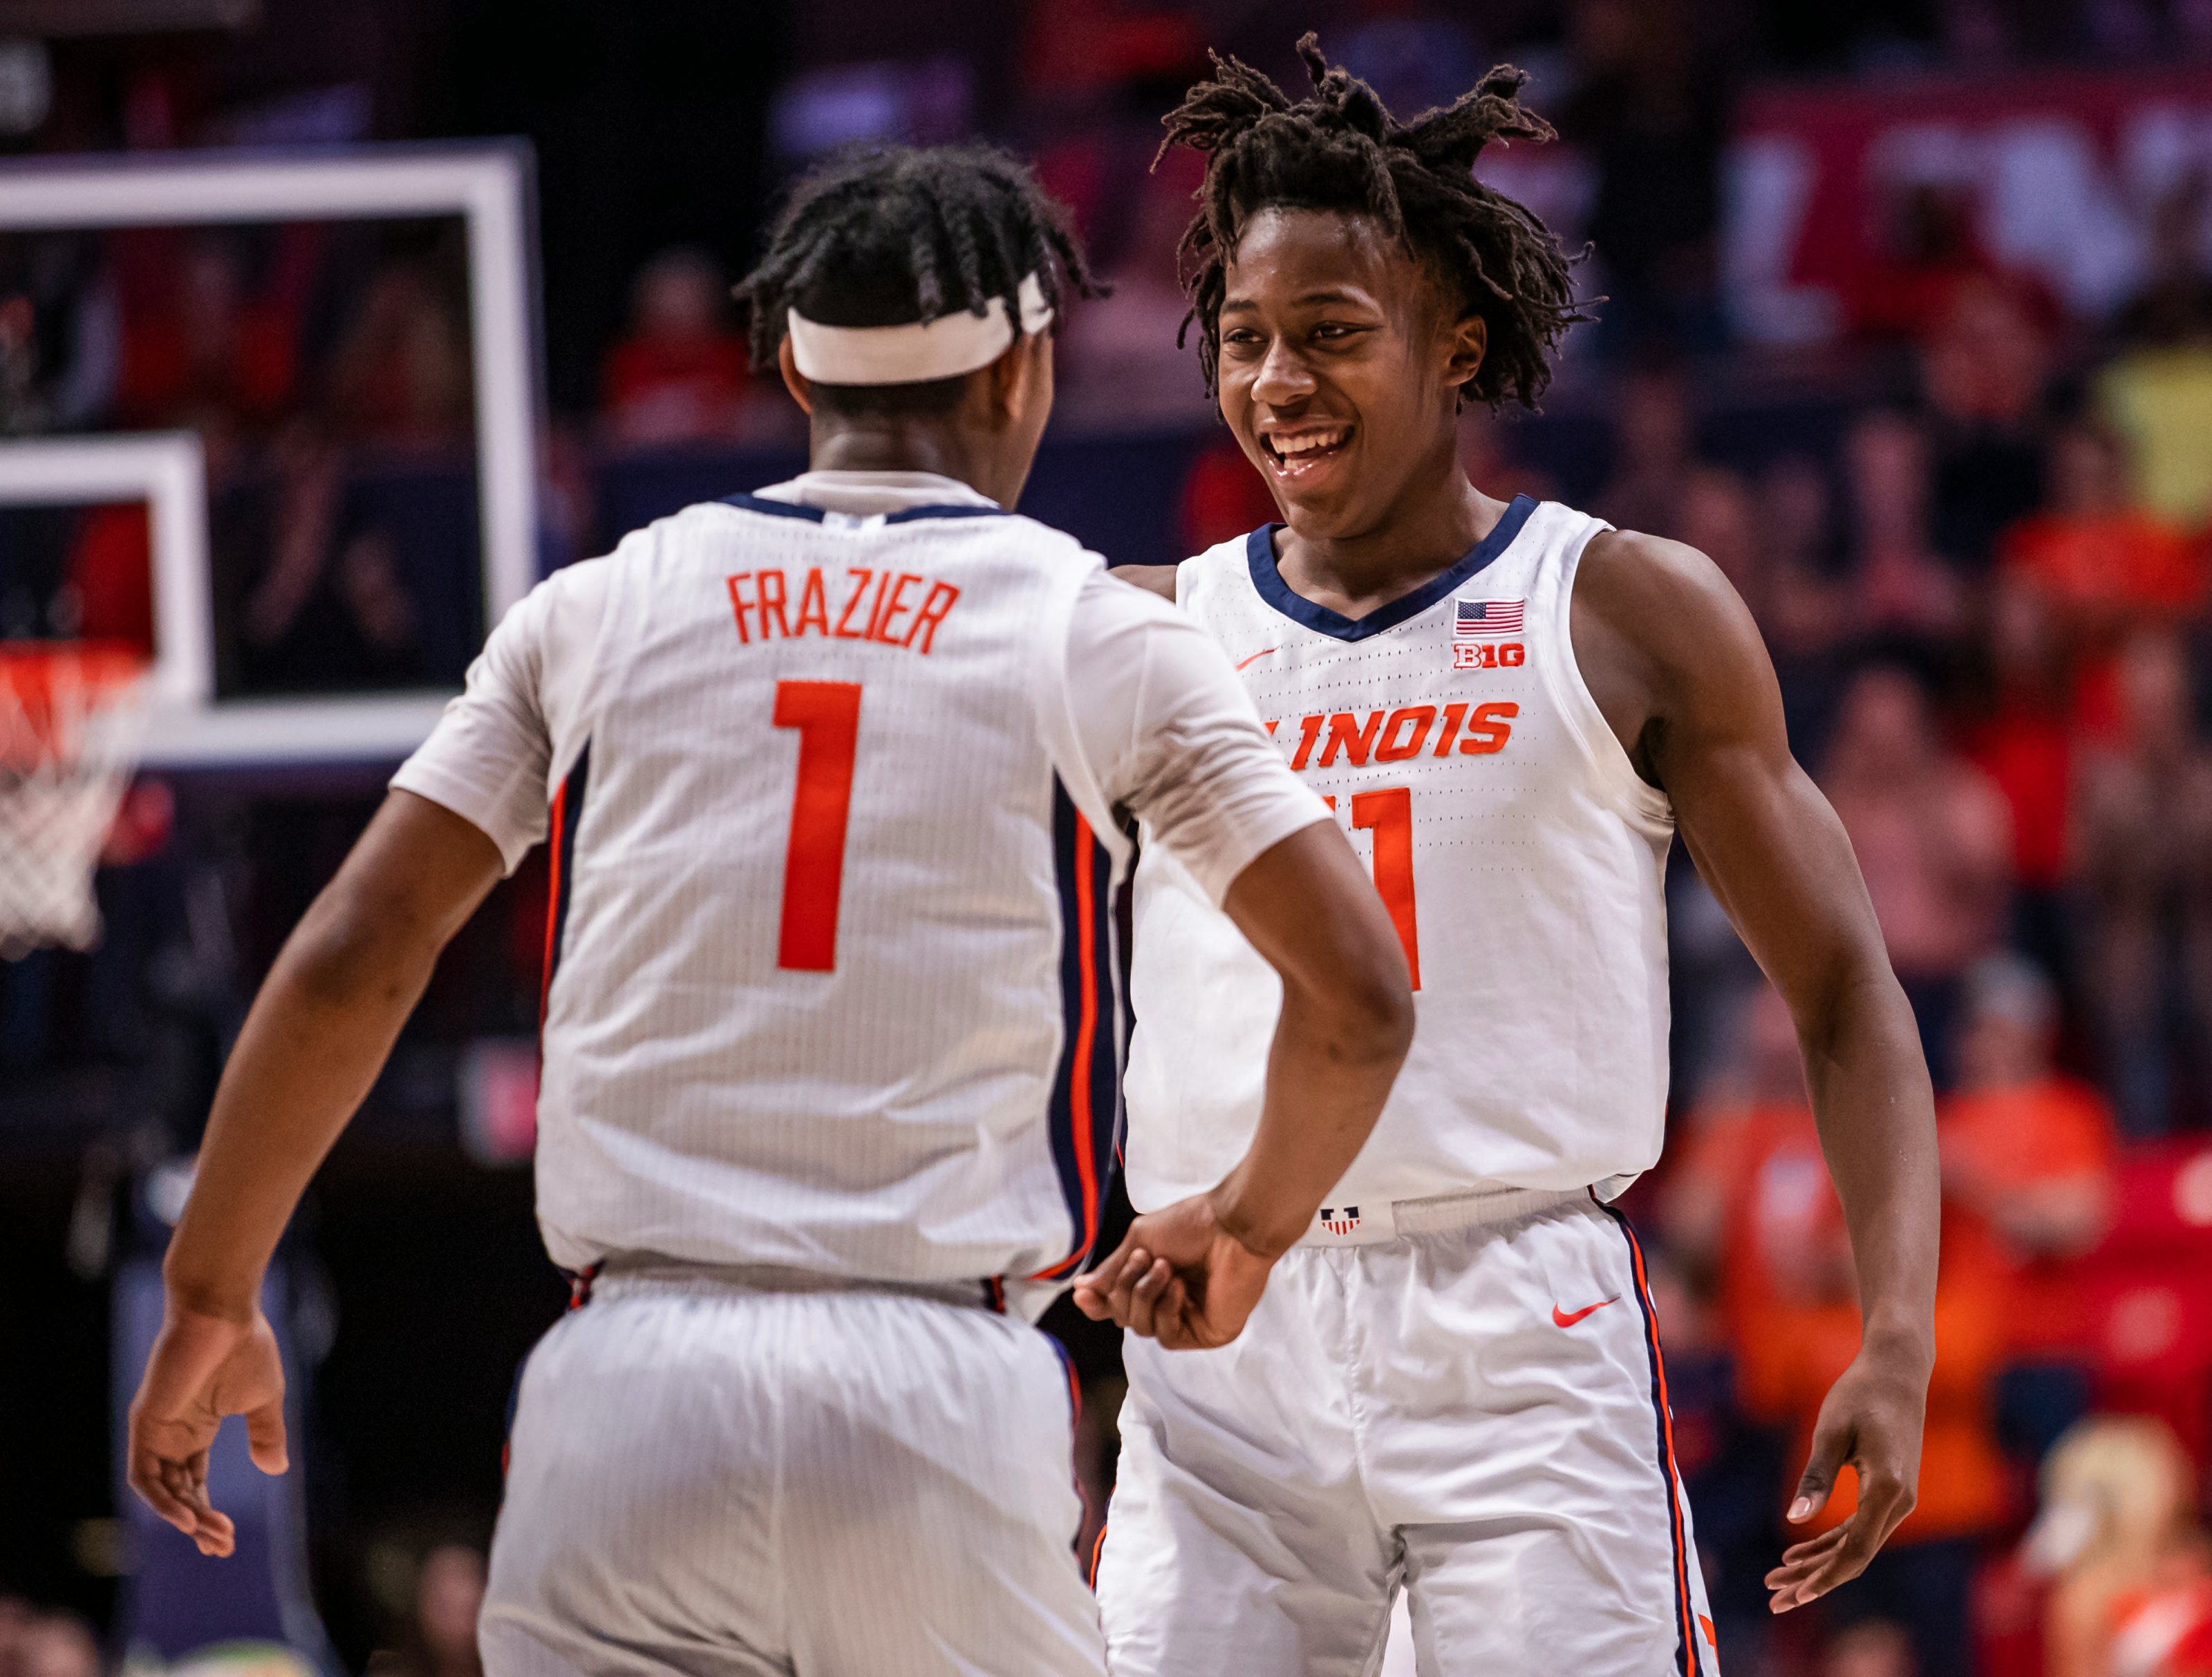 Four storylines to watch with Illinois Basketball this season